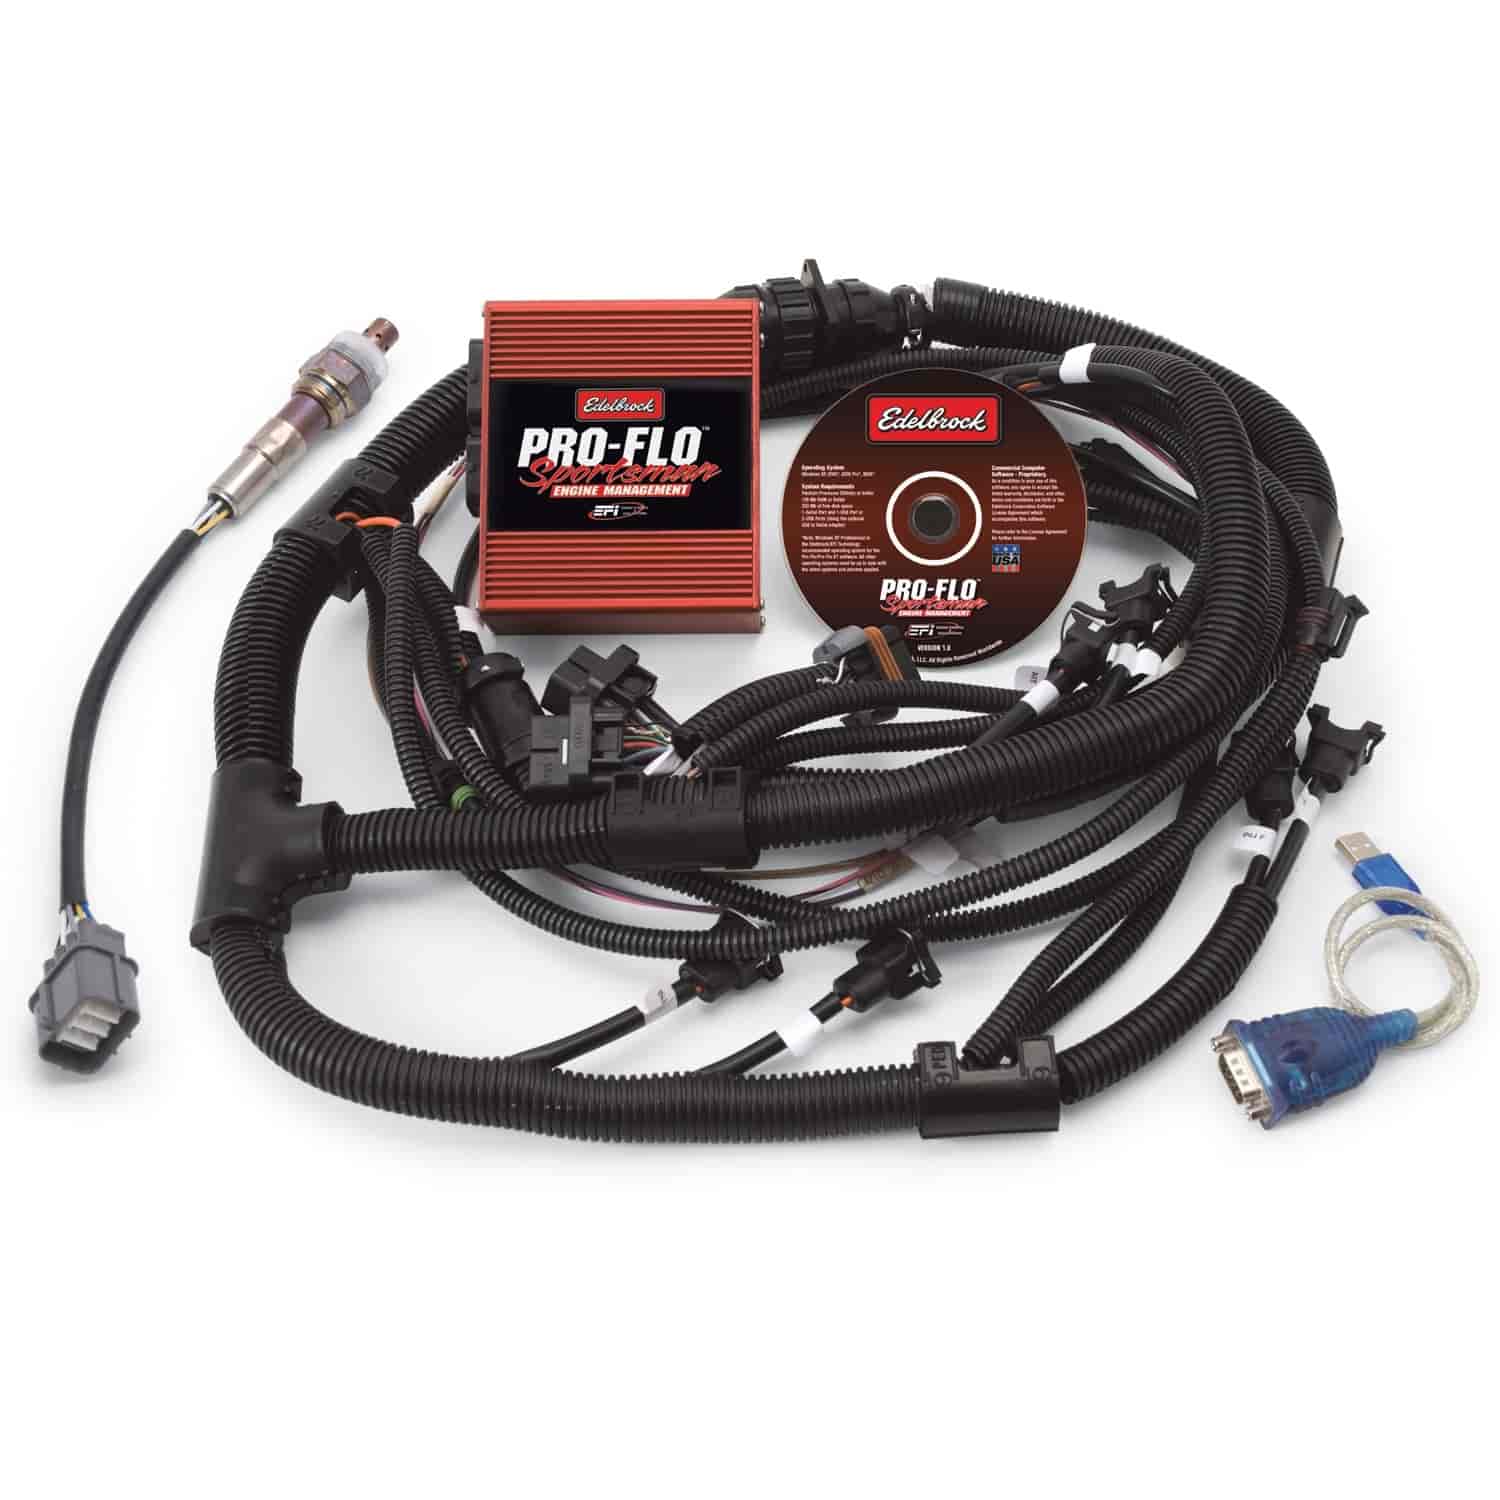 Pro-Flo Sportsman EFI System Harness Only Does Not Include ECU or Software